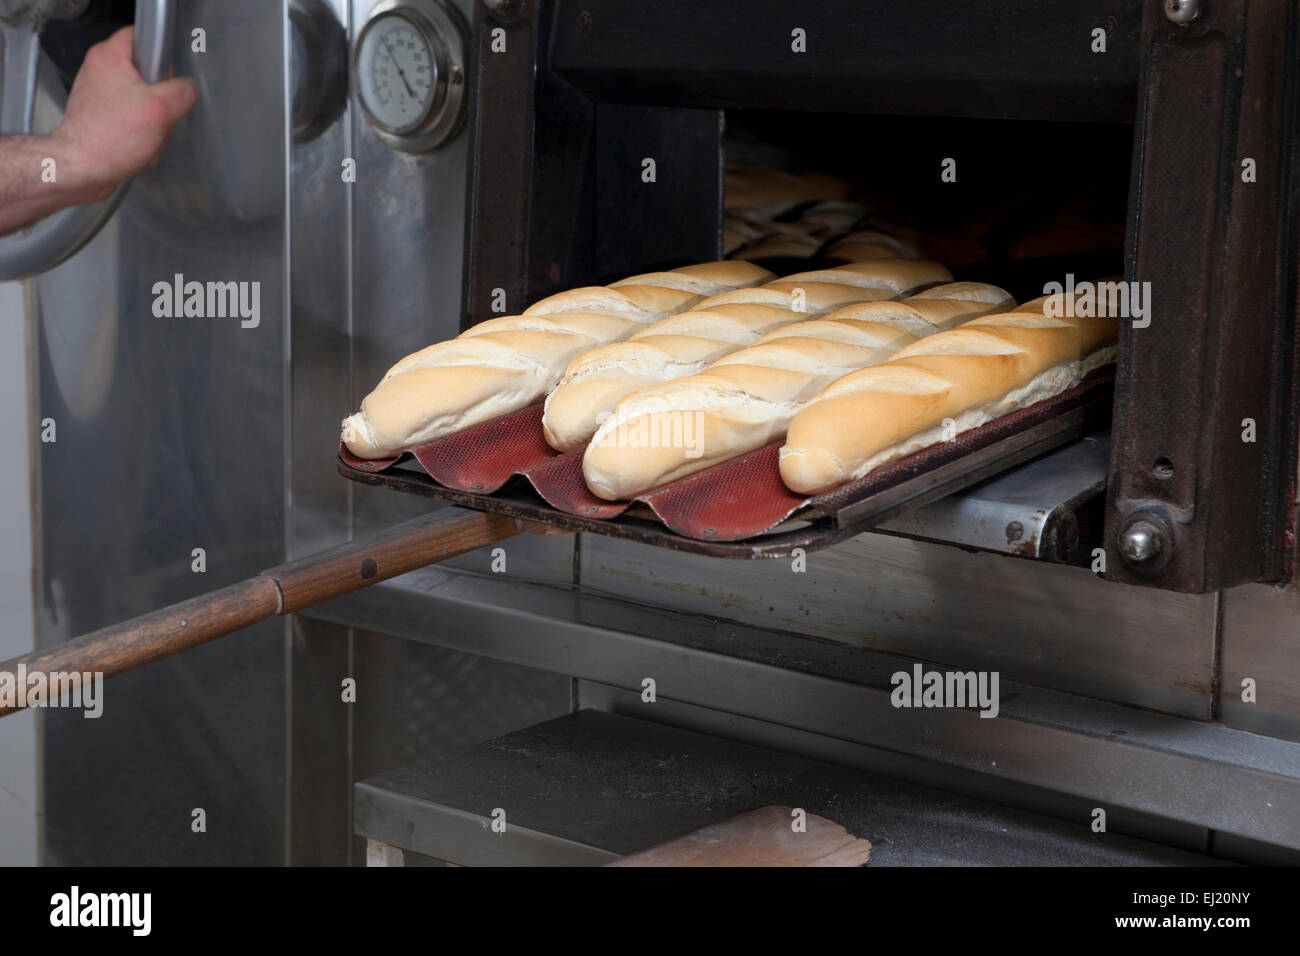 Manufacturing process of spanish bread Stock Photo